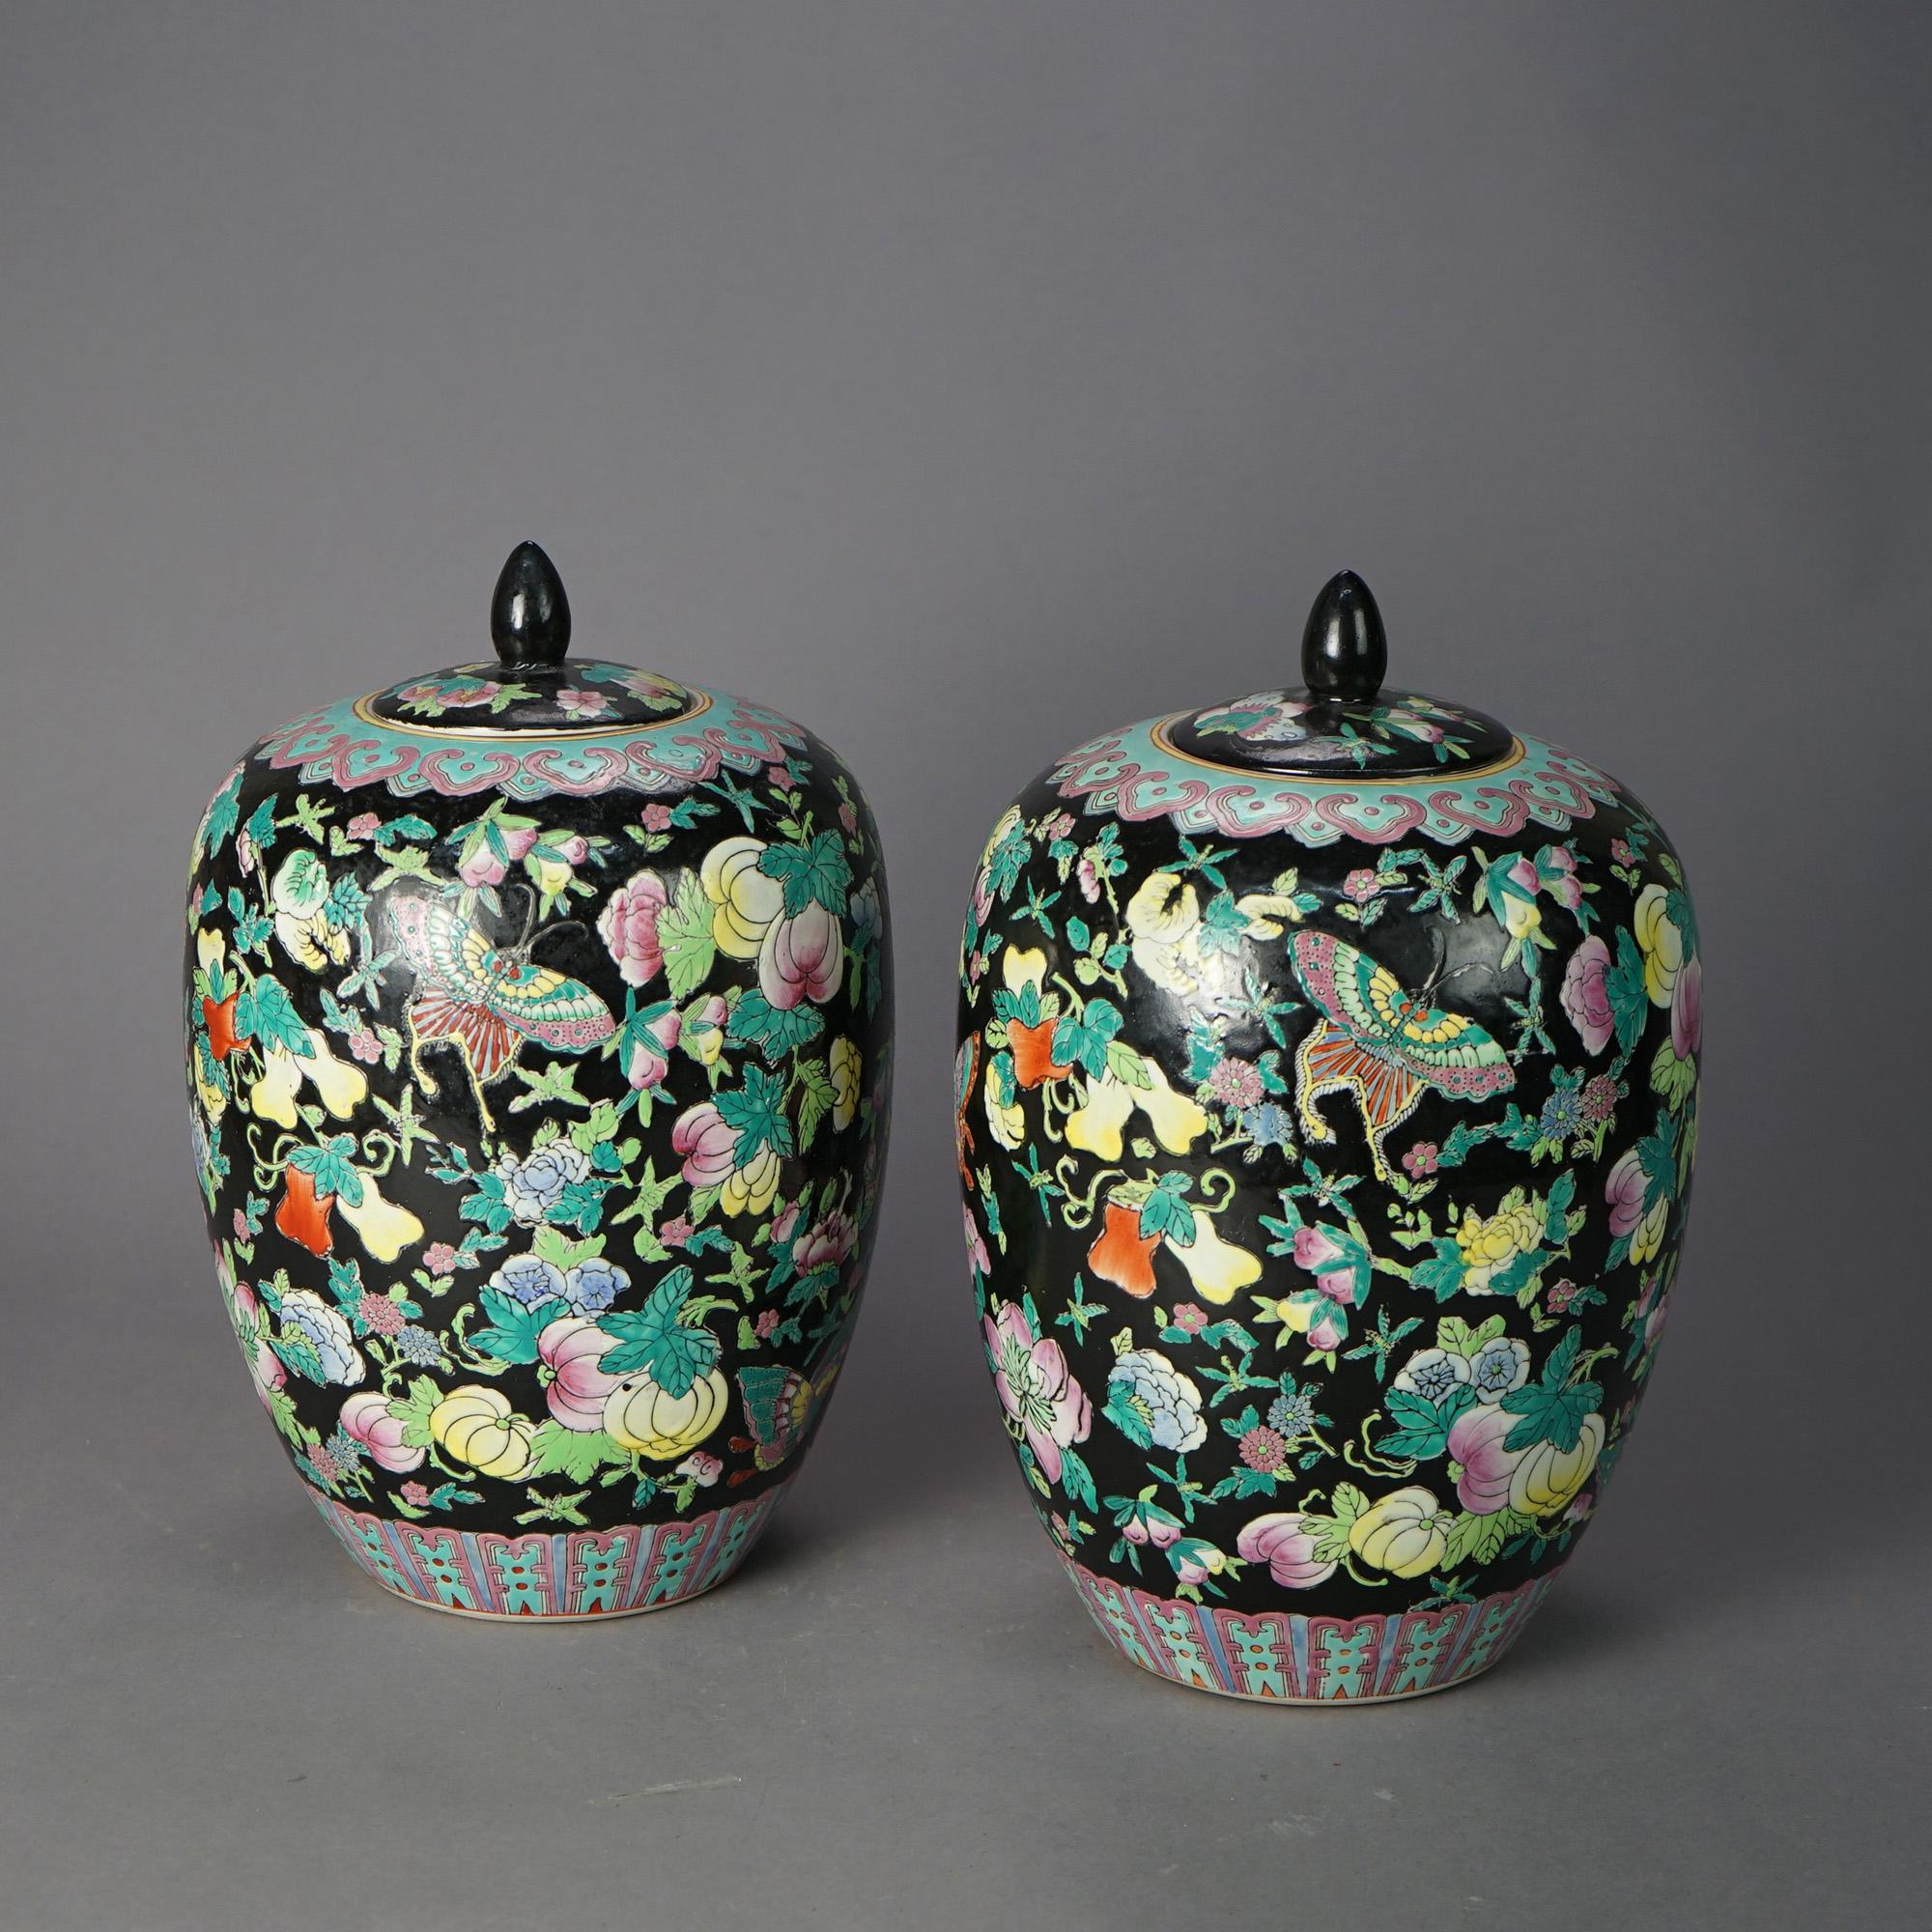 20th Century Chinese Porcelain Covered Urn Jars with Garden Motif, 20th C